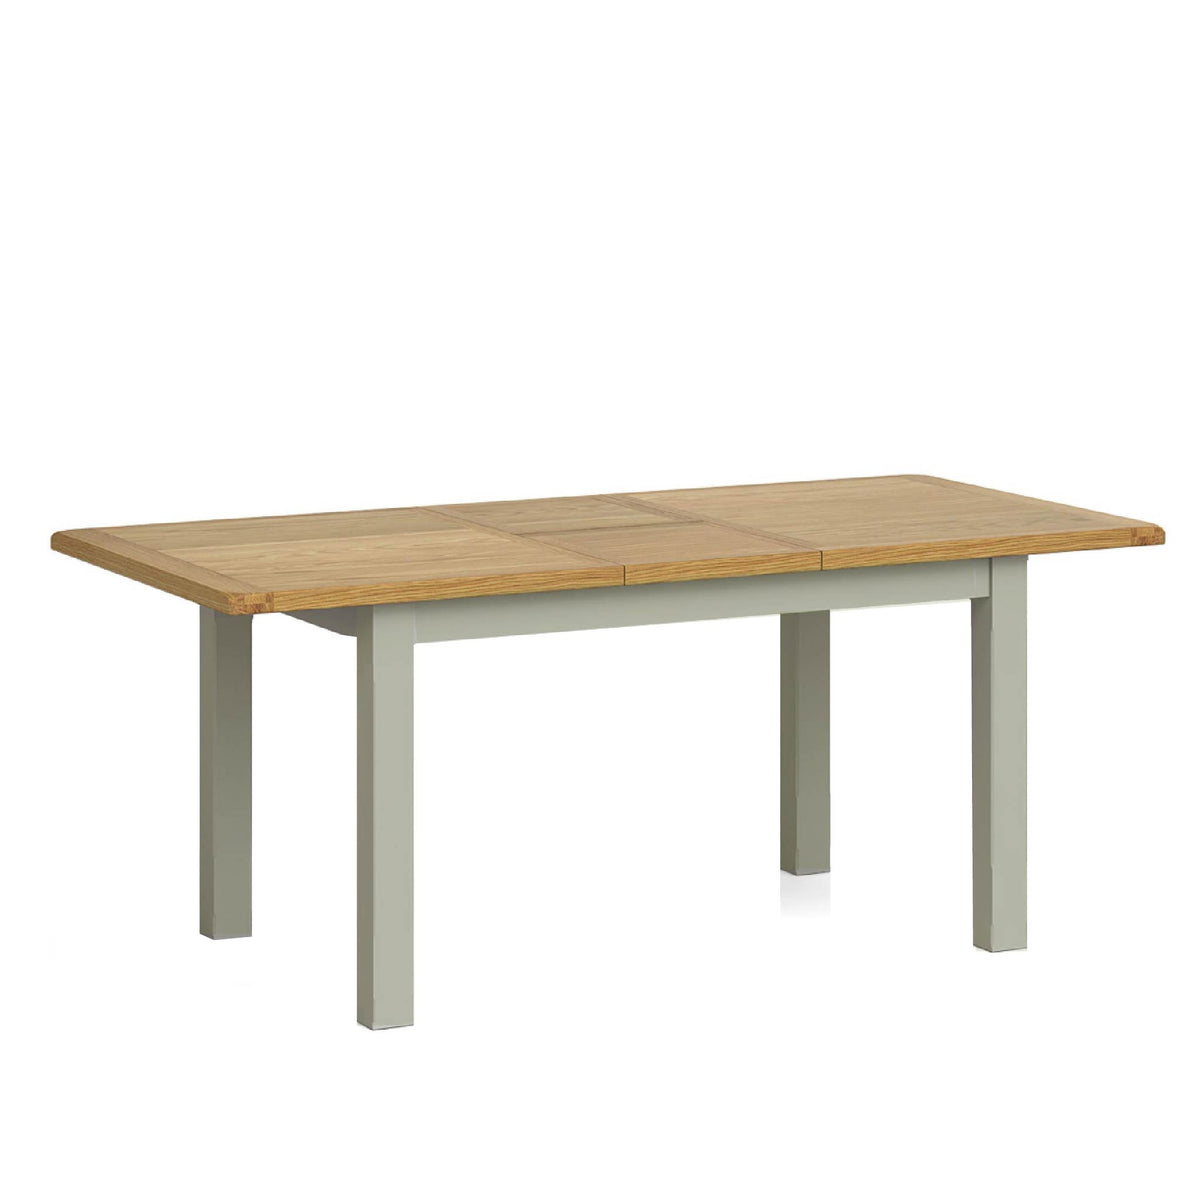 Padstow Grey 140-180cm Extendable Dining Table, Oak Top | Solid Wood ...